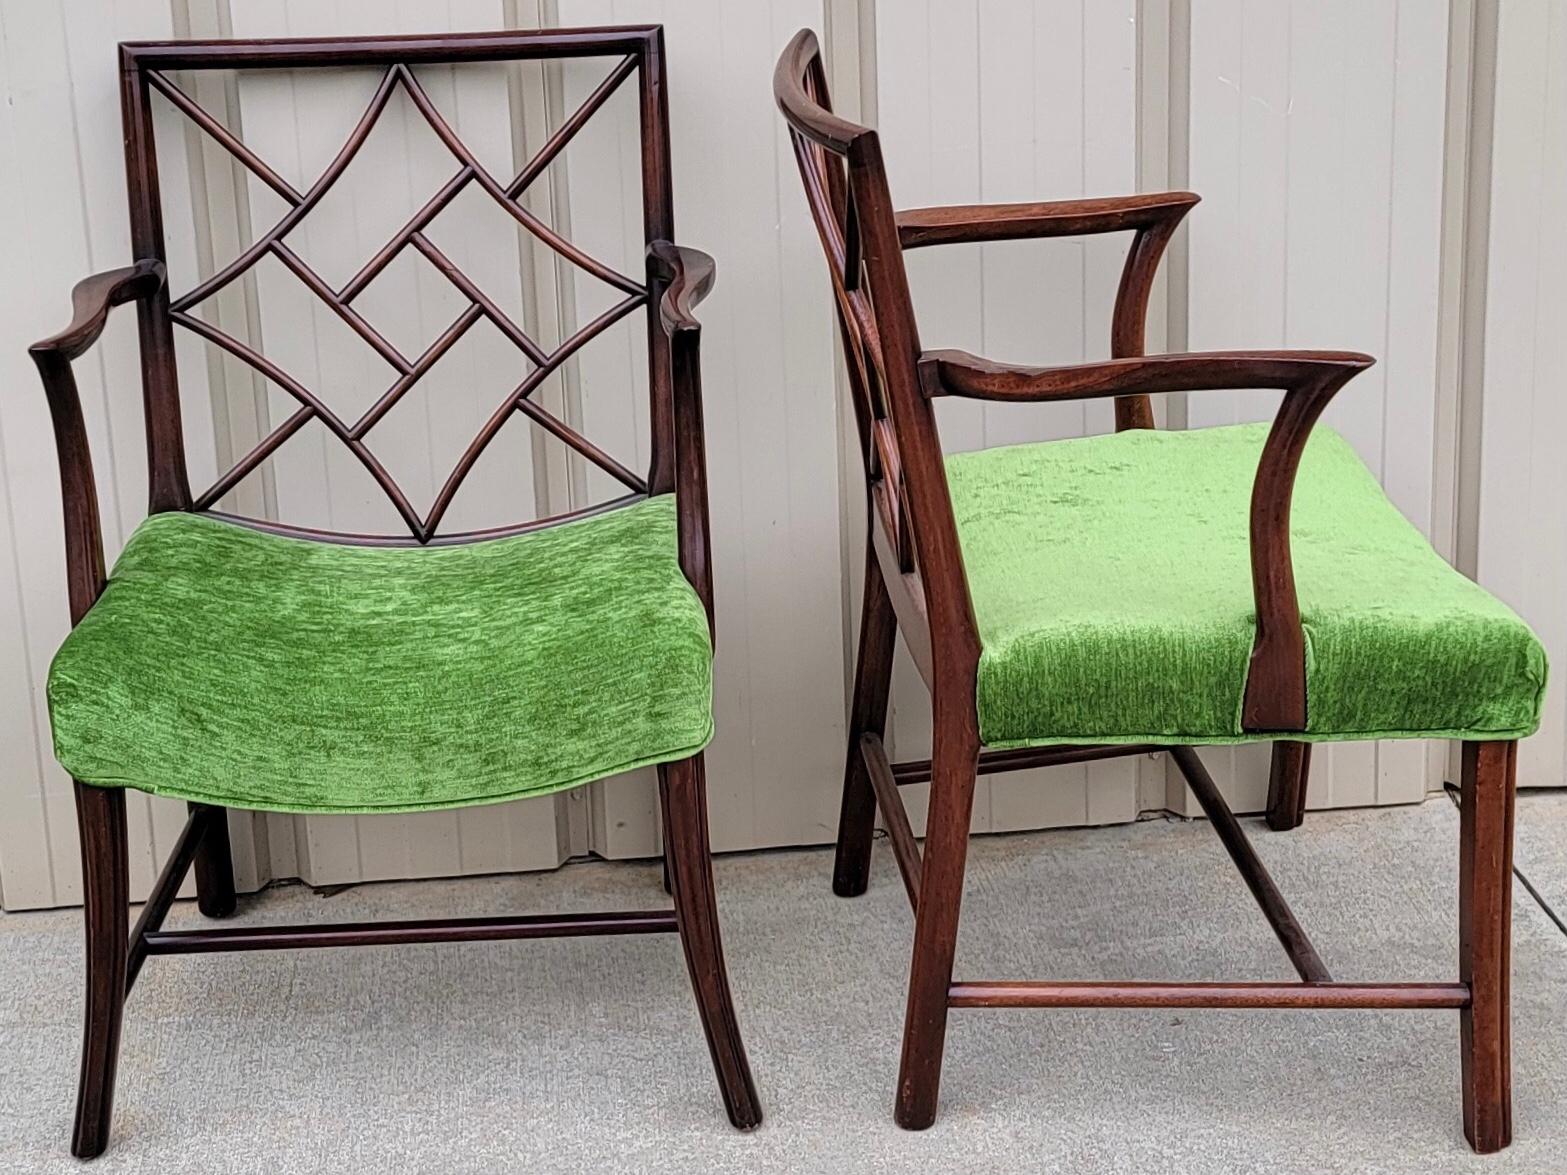 These is a near pair of 19th century carved mahogany Chinese chippendale style chairs. The green velvet is in very good condition. One of the chairs is 22.5”L x 21”W x 33.75”H. Arm is 26.5, and the seat is 18”.